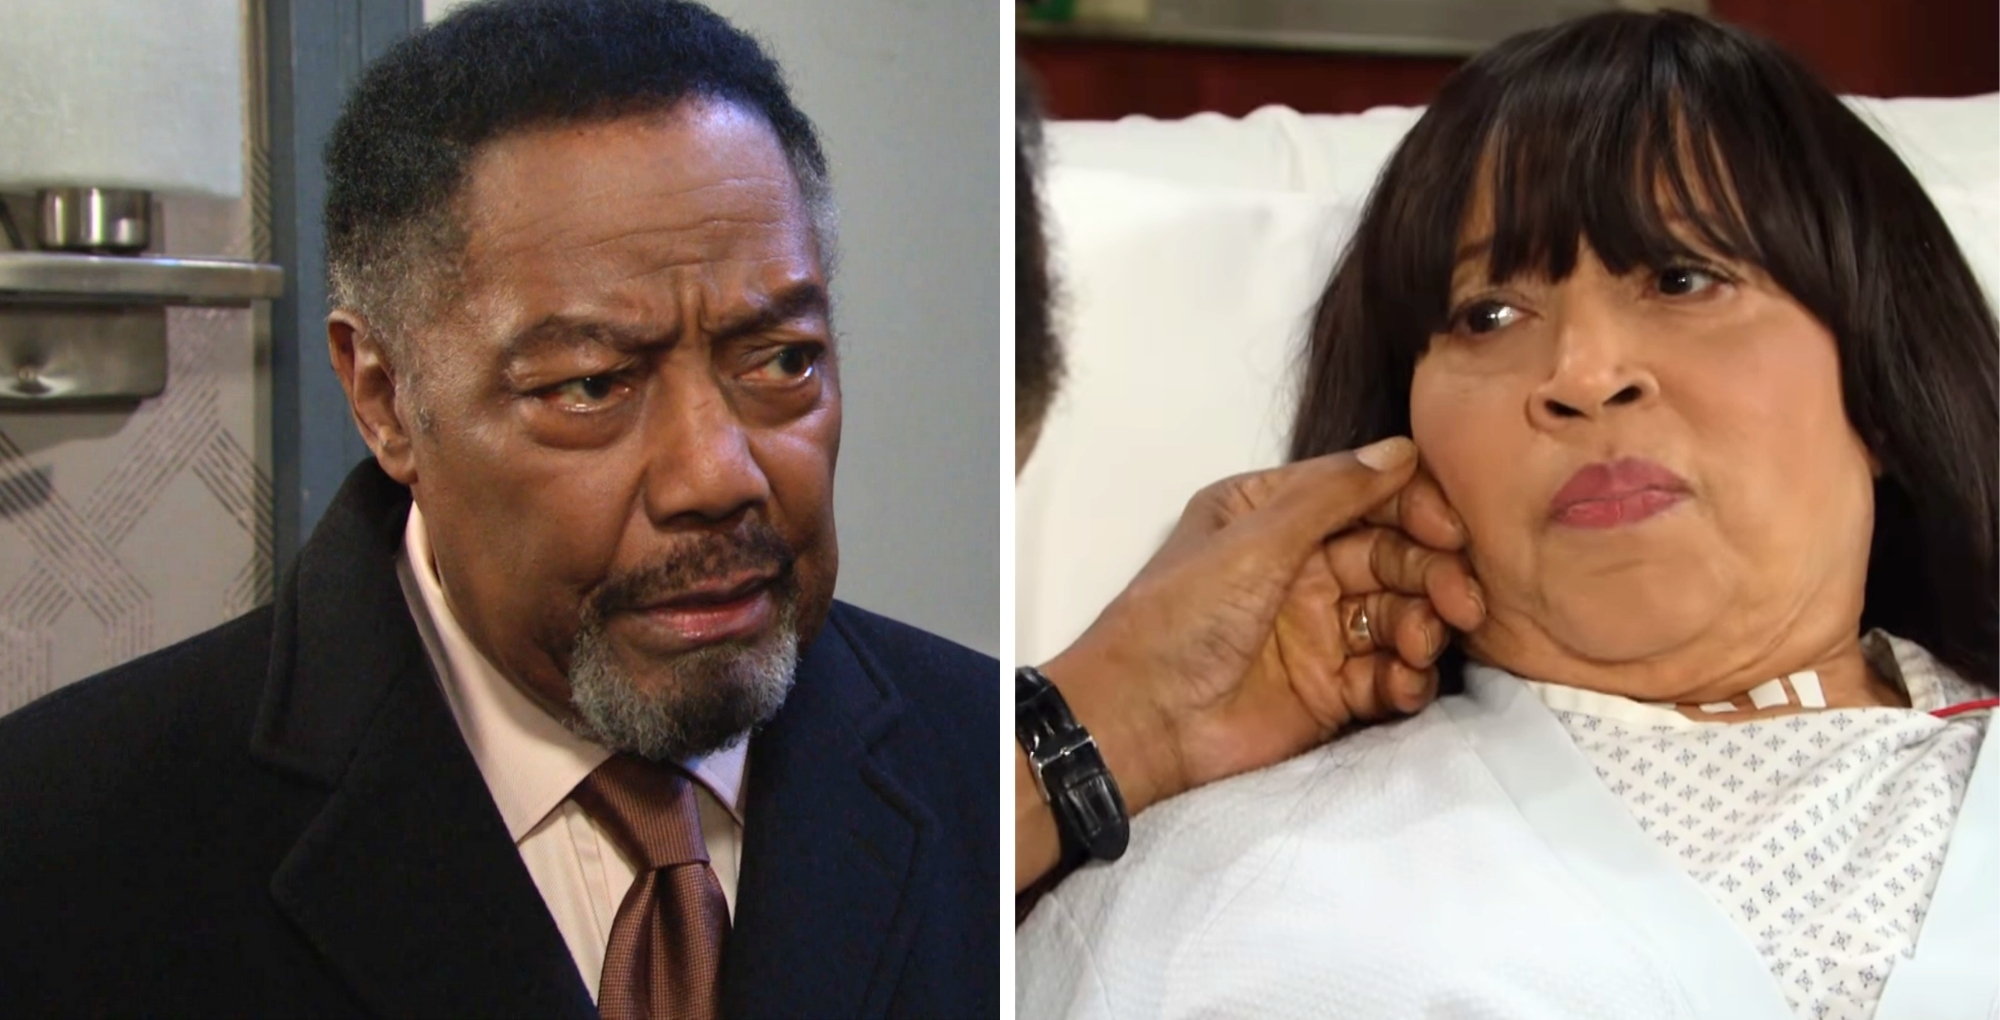 Days of our Lives Spoilers: Will Abe's Love Come Too Late?